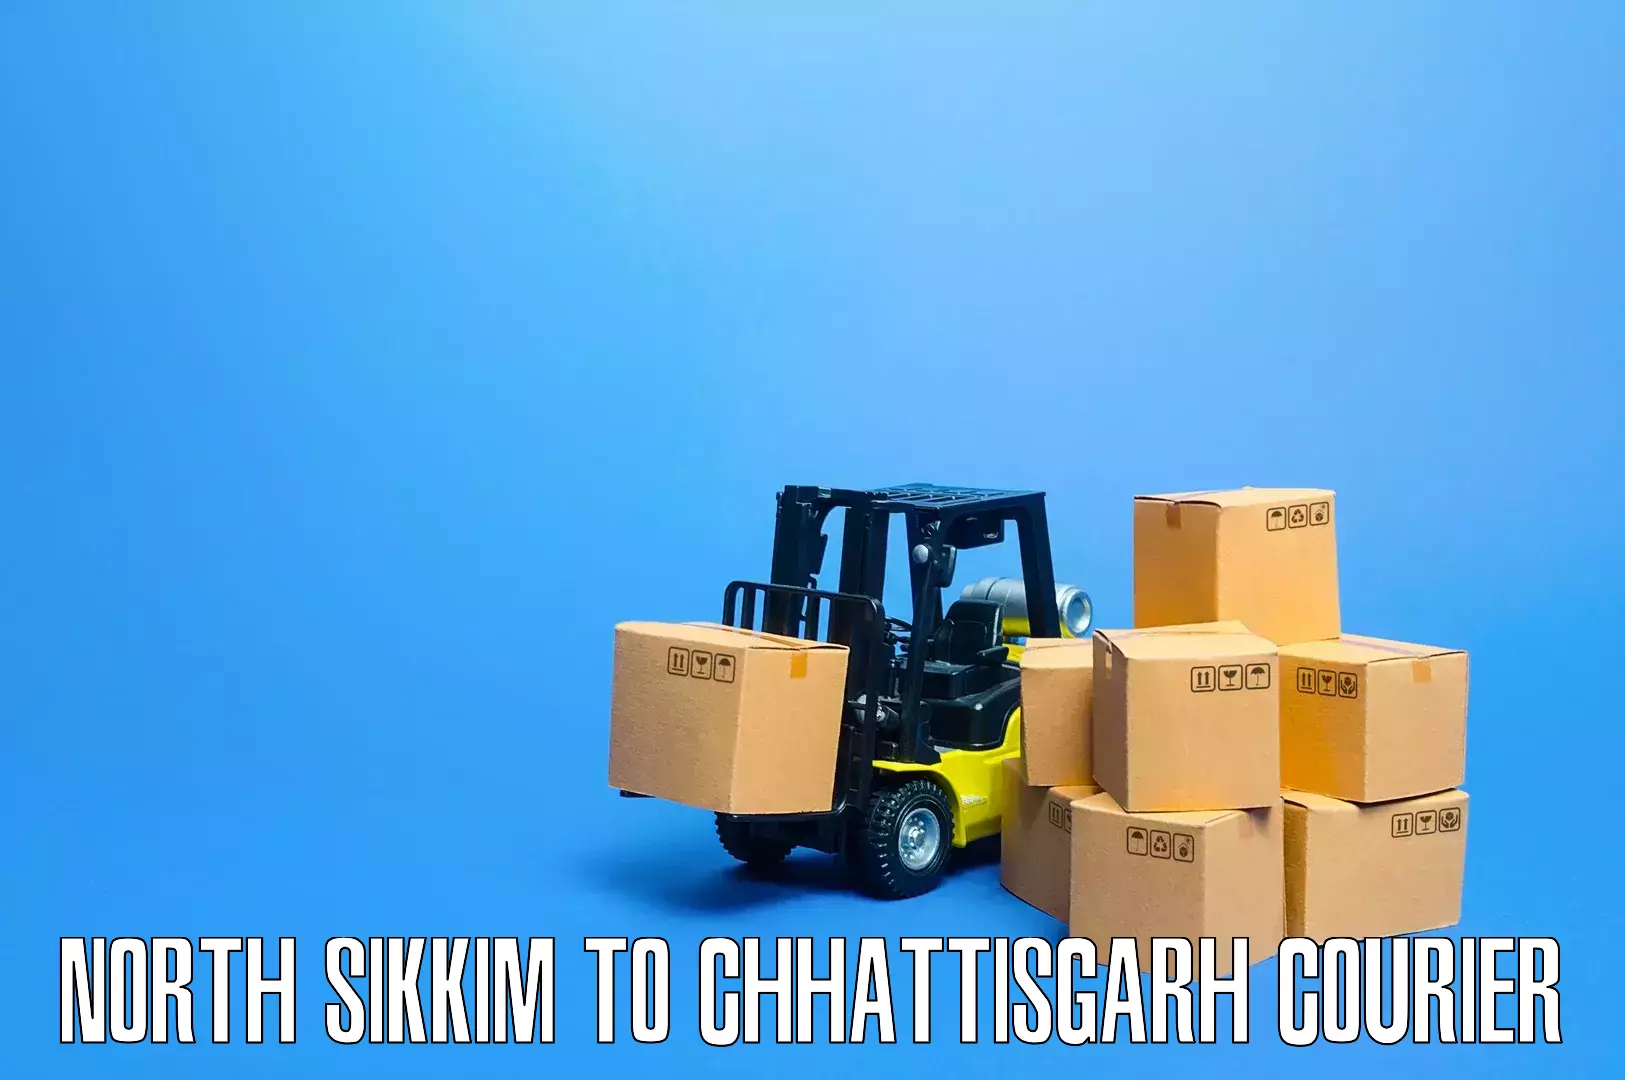 Reliable goods transport North Sikkim to Raigarh